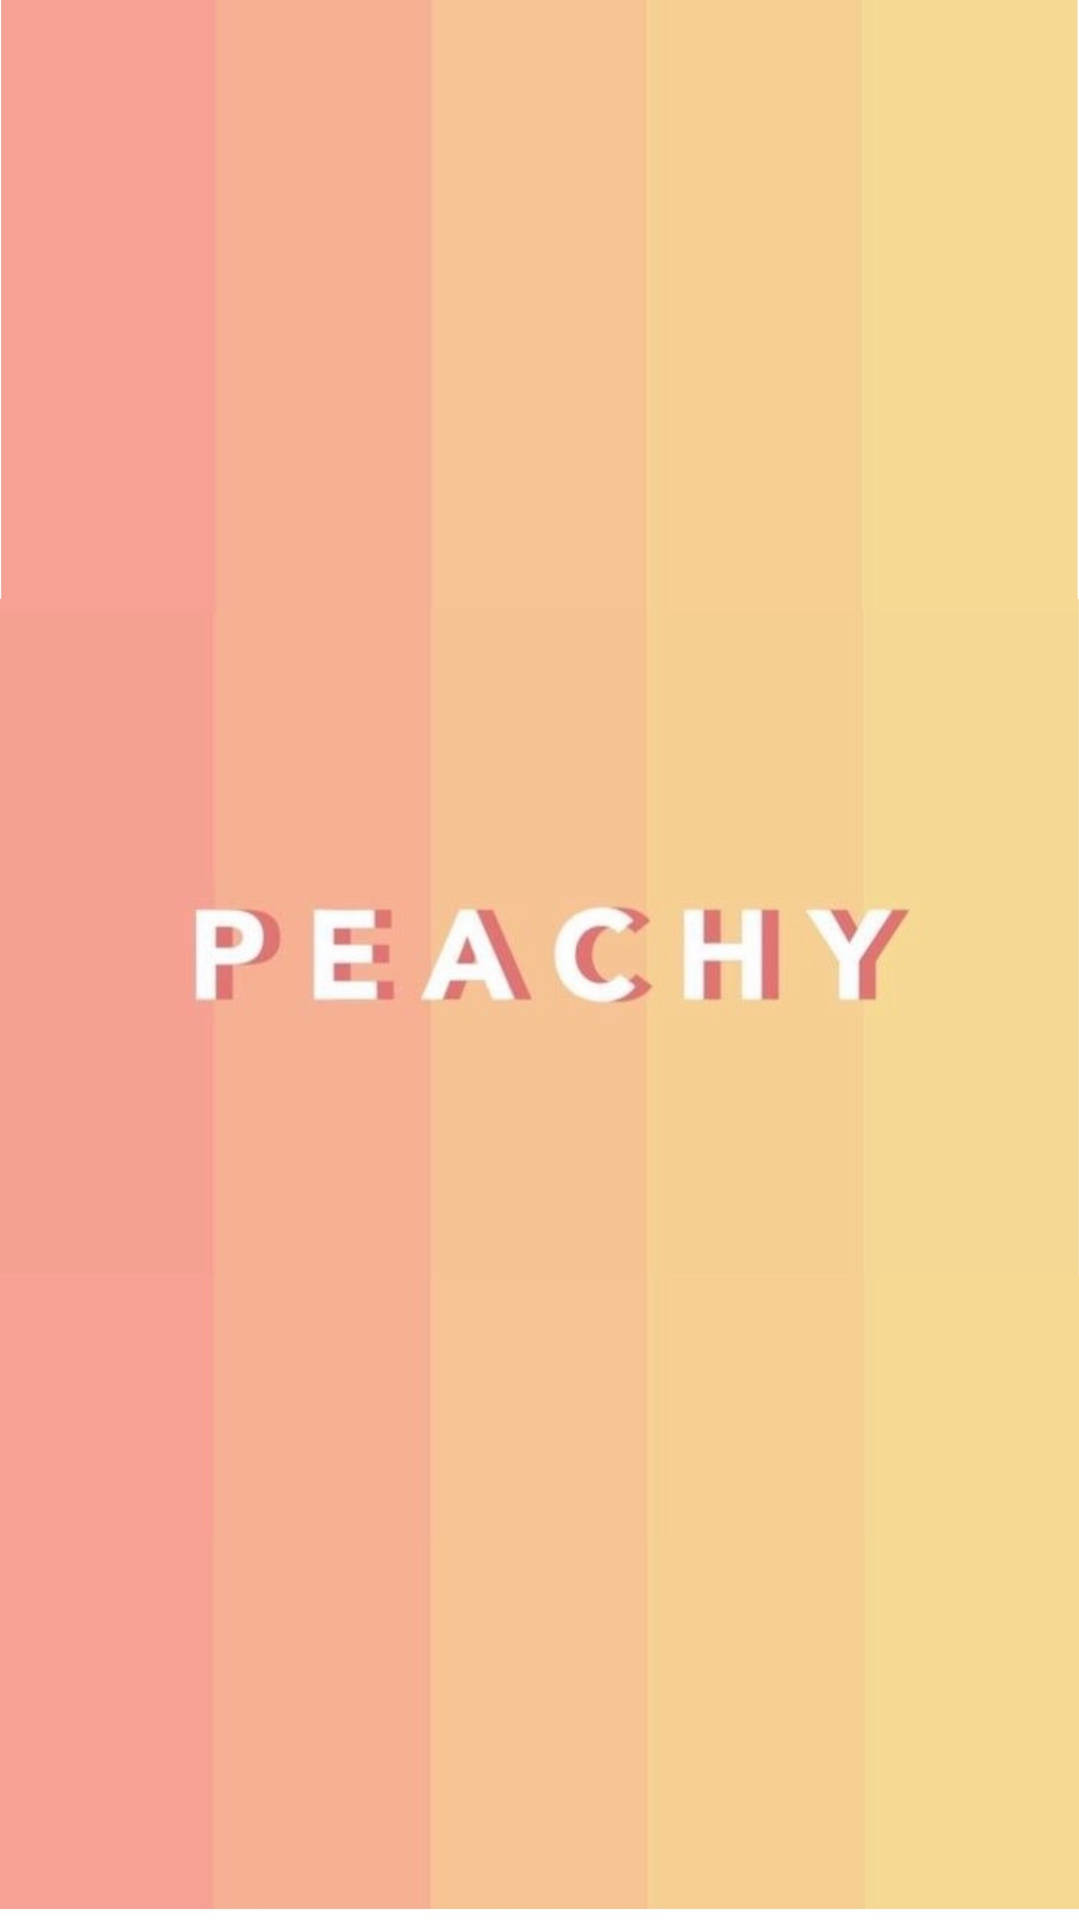 Peachy Text On Pastel Peach Shades Background